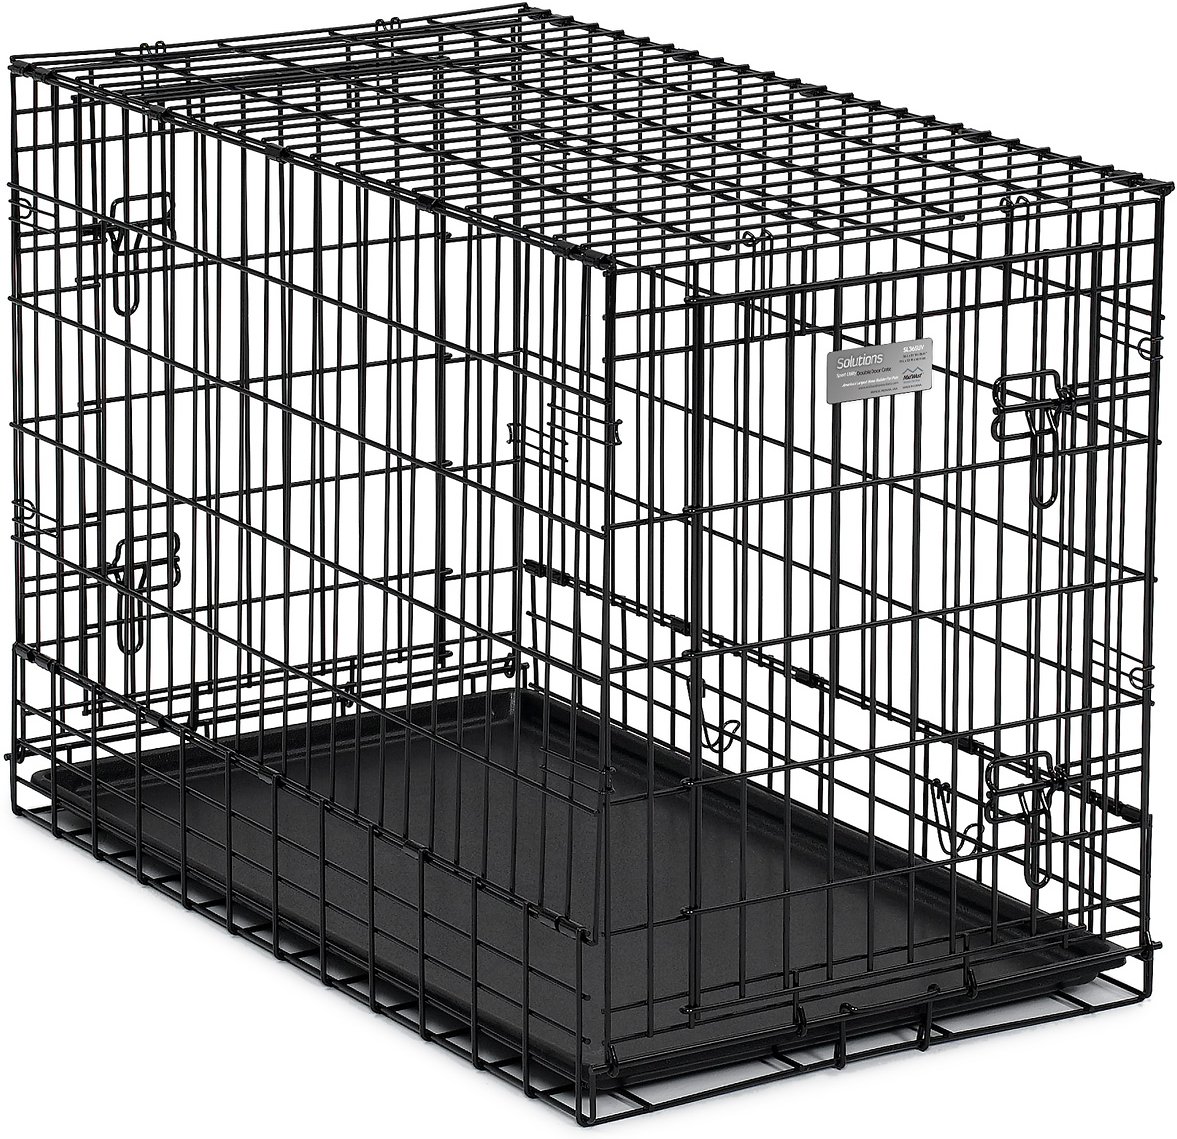 Enhancing Comfort and Safety of your Dog with Double door dog crate